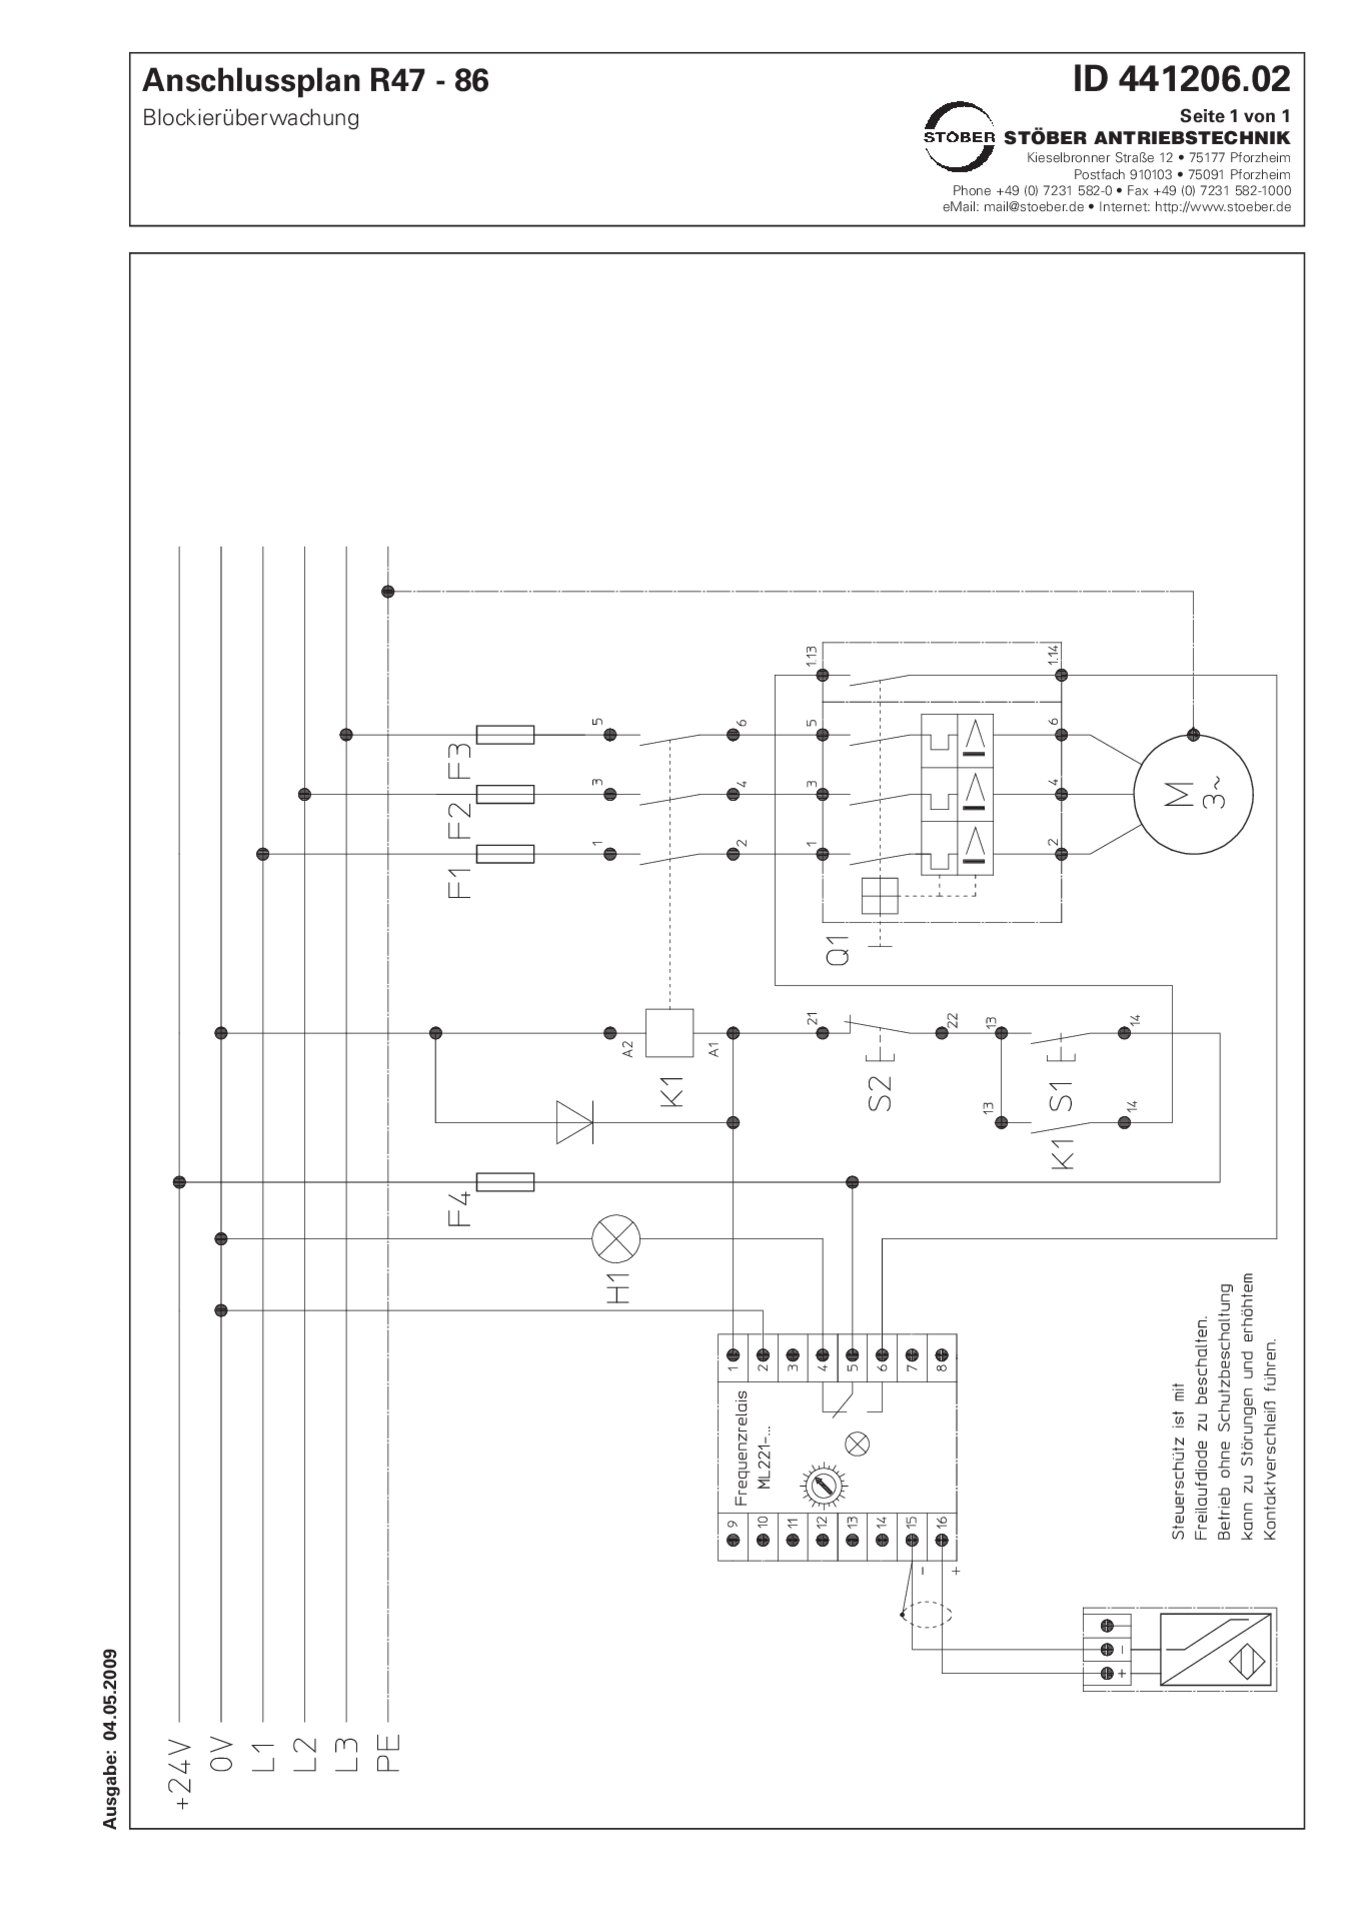 Connection plan R47-R86 Jamming control 24 V